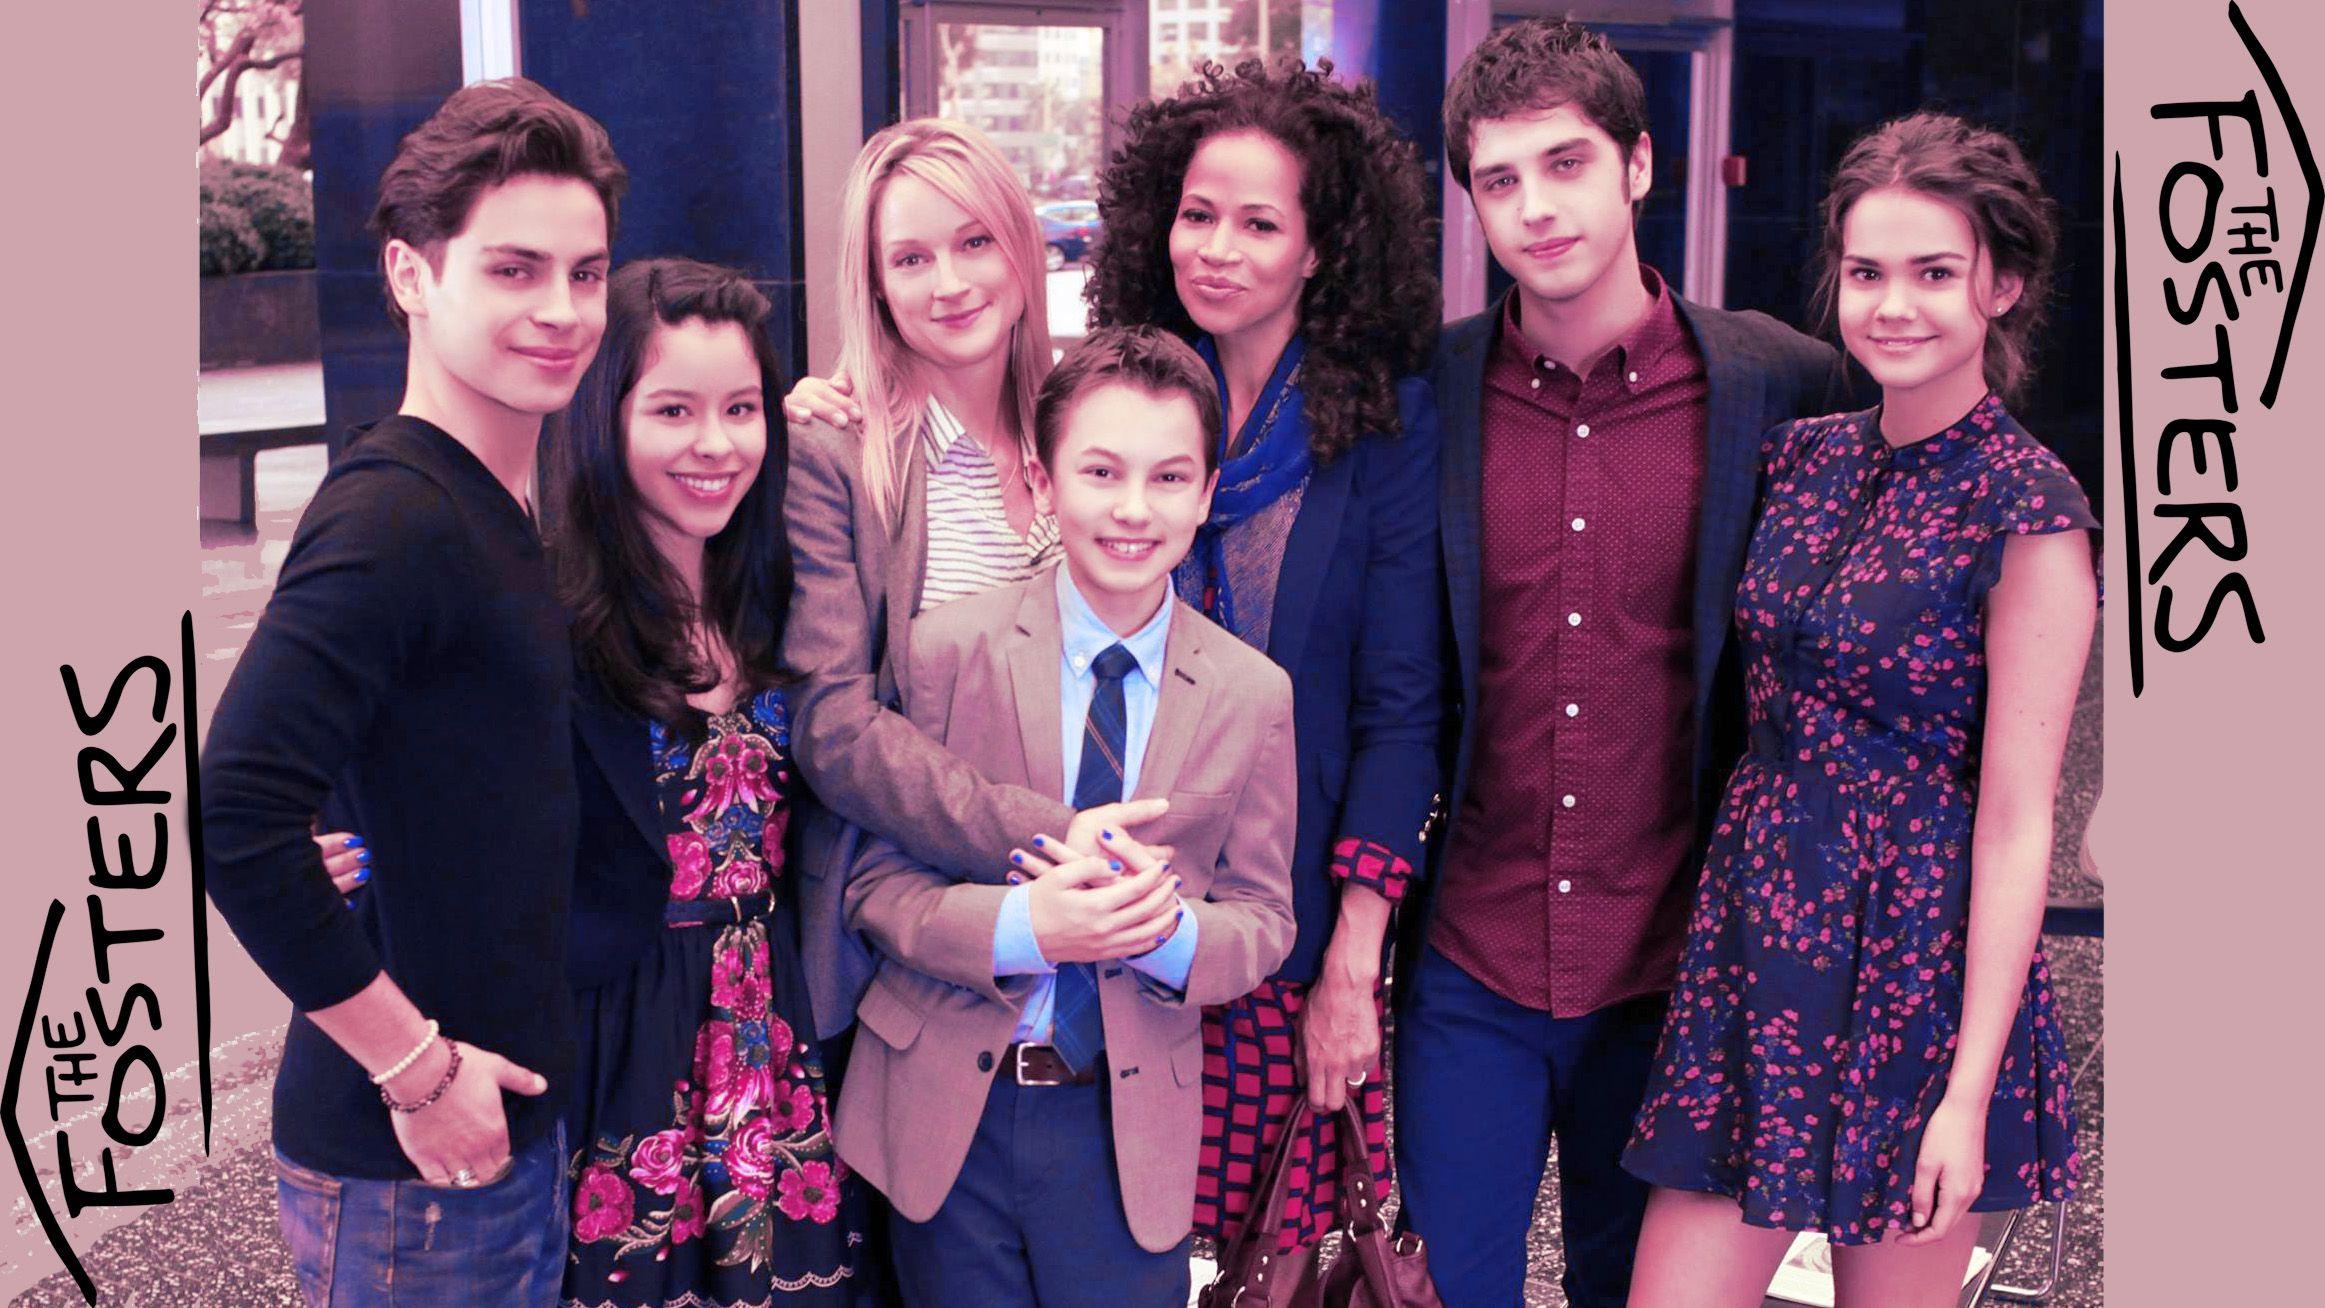 The Fosters wallpaper, click the image, right. • HyAdamsFoster